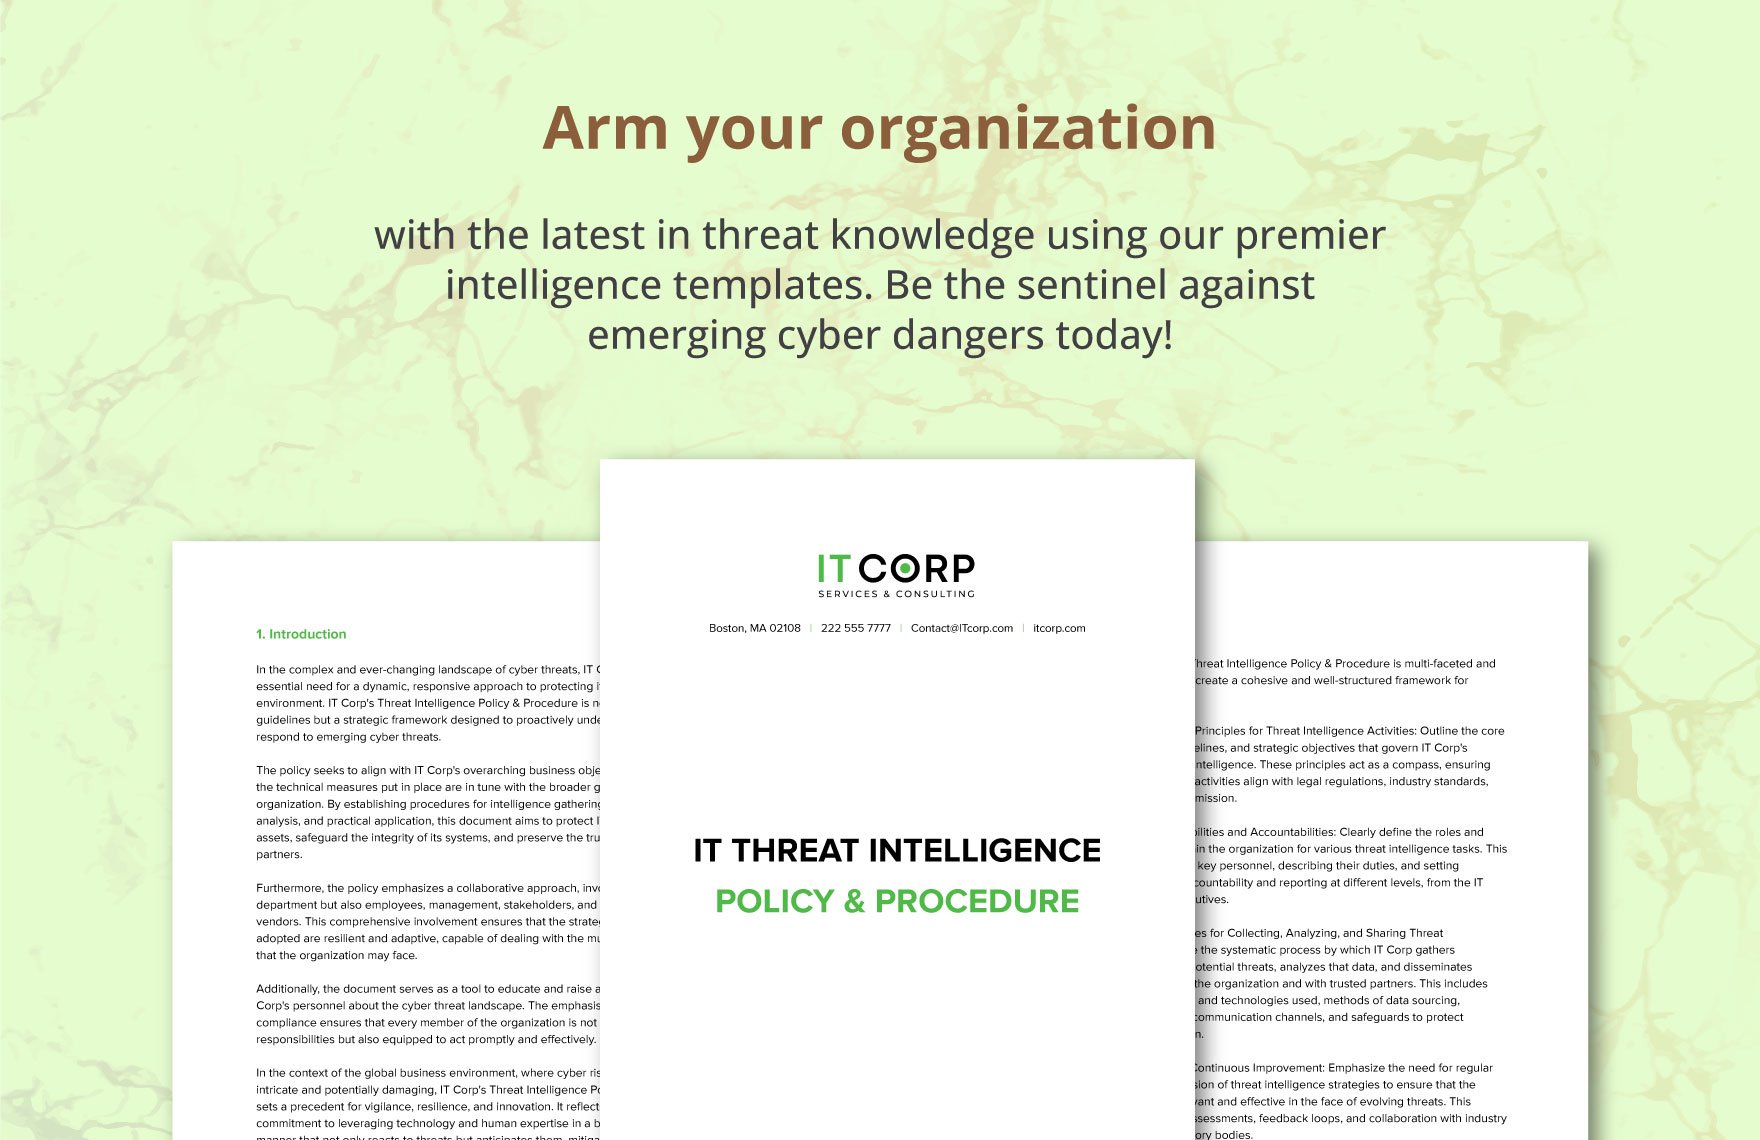 IT Threat Intelligence Policy & Procedure Template